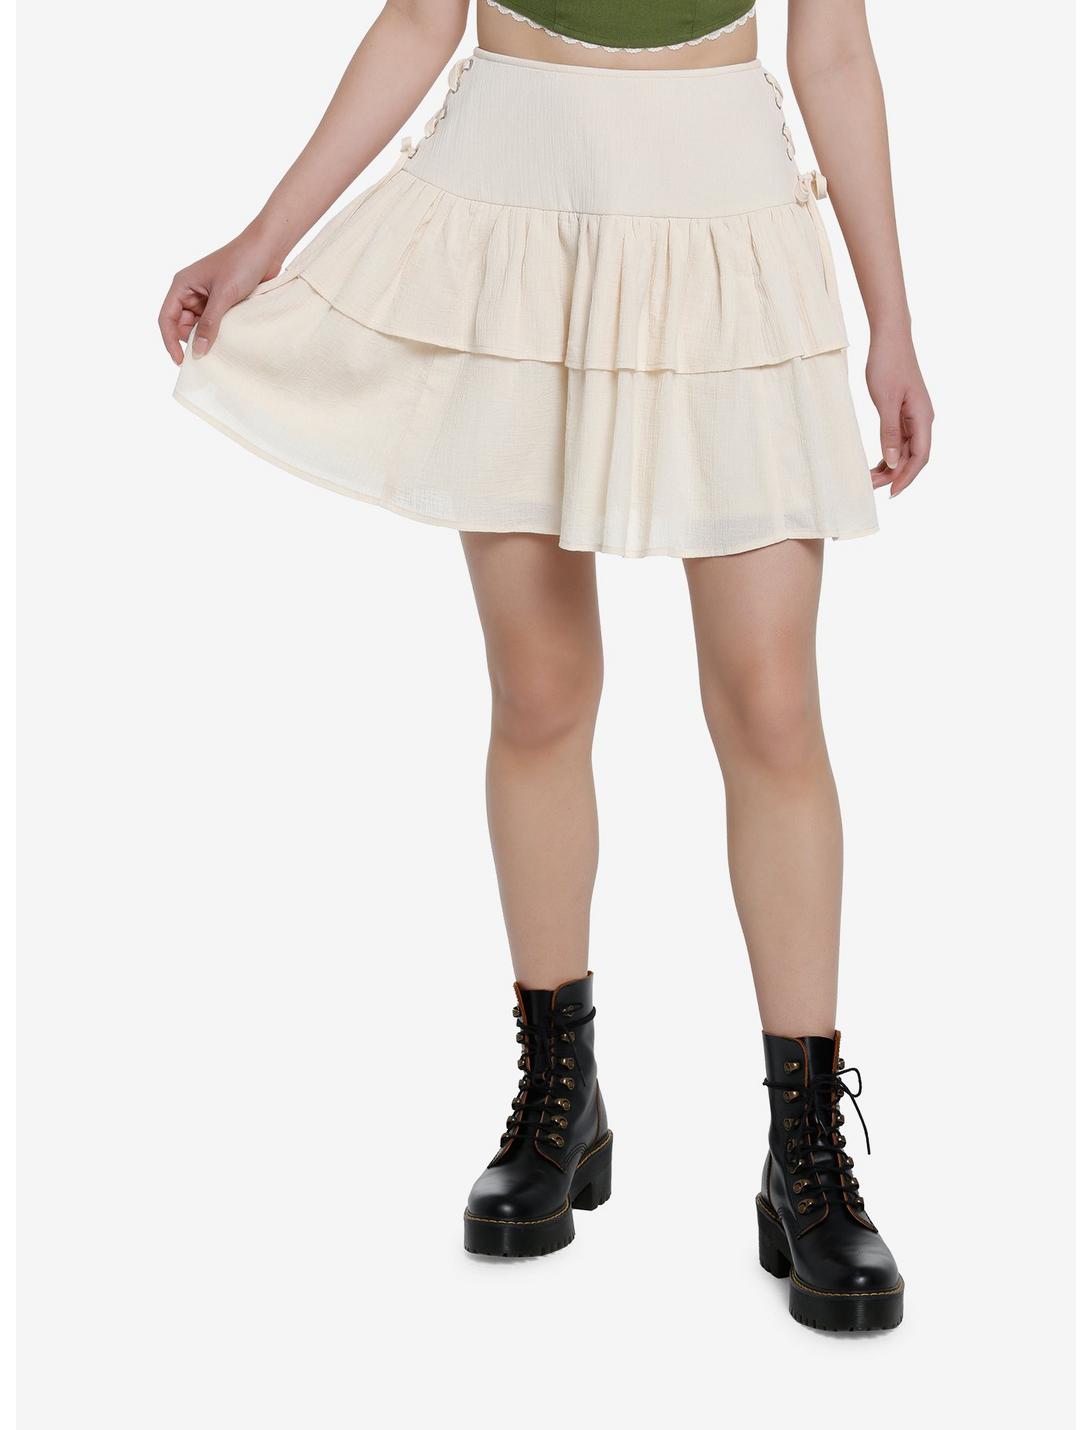 Thorn & Fable Ivory Lace-Up Tiered Skirt | Hot Topic